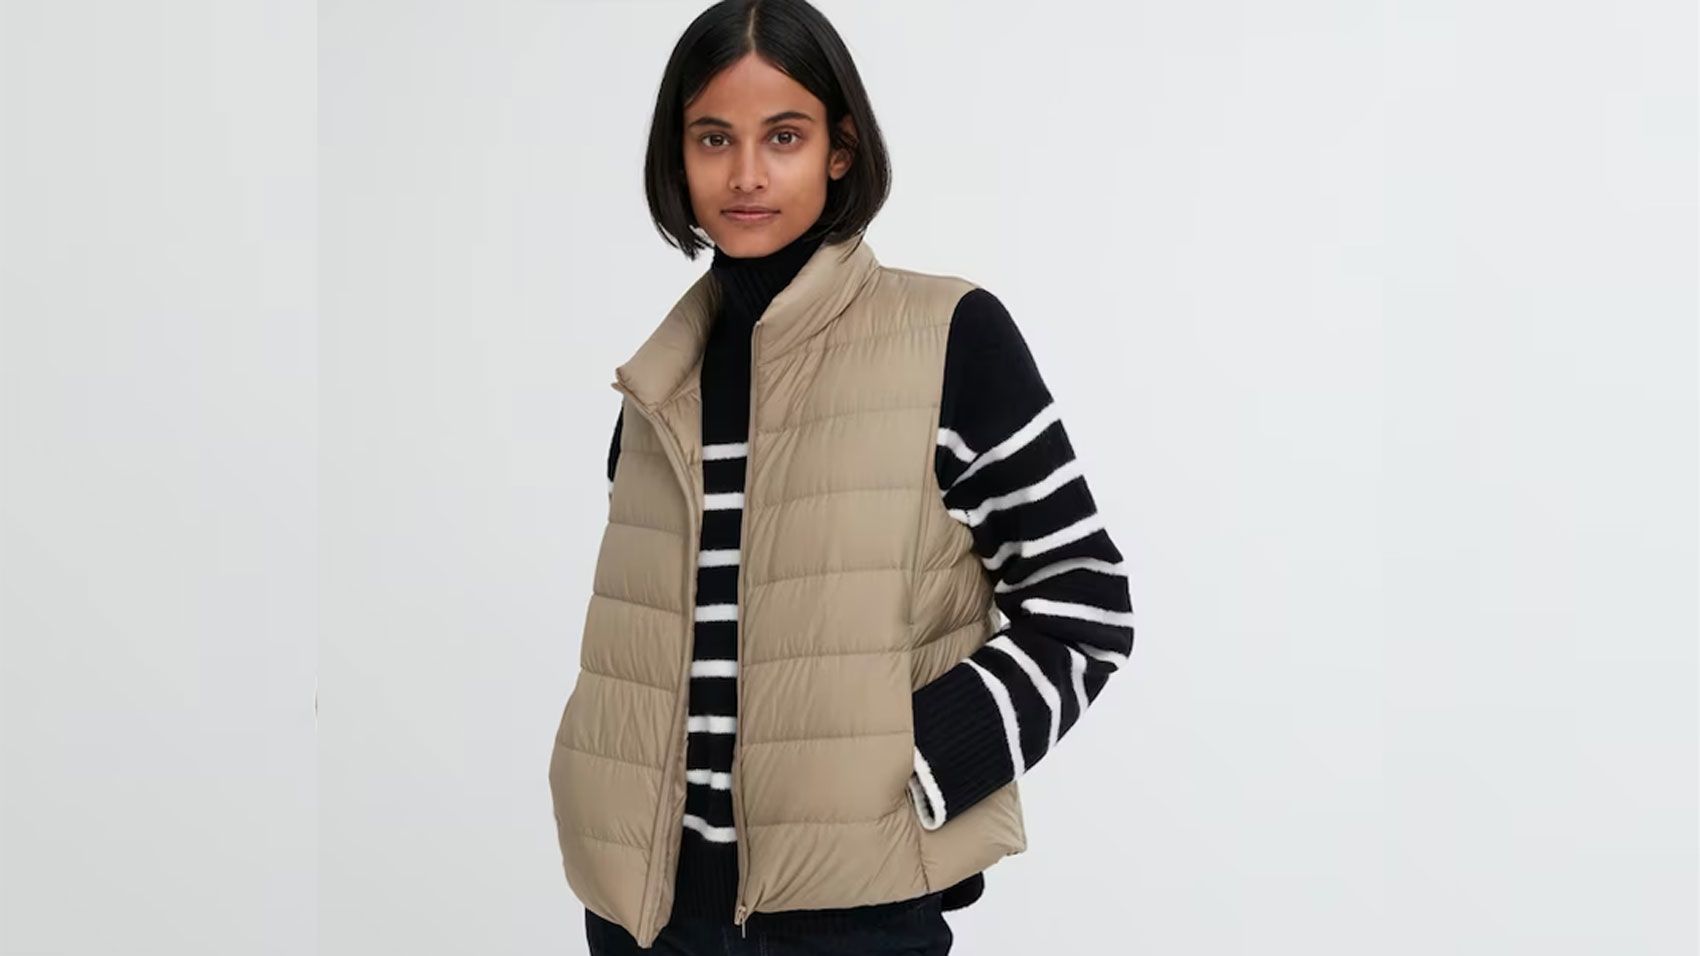 Women's Puffer Jackets, Vests and Coats